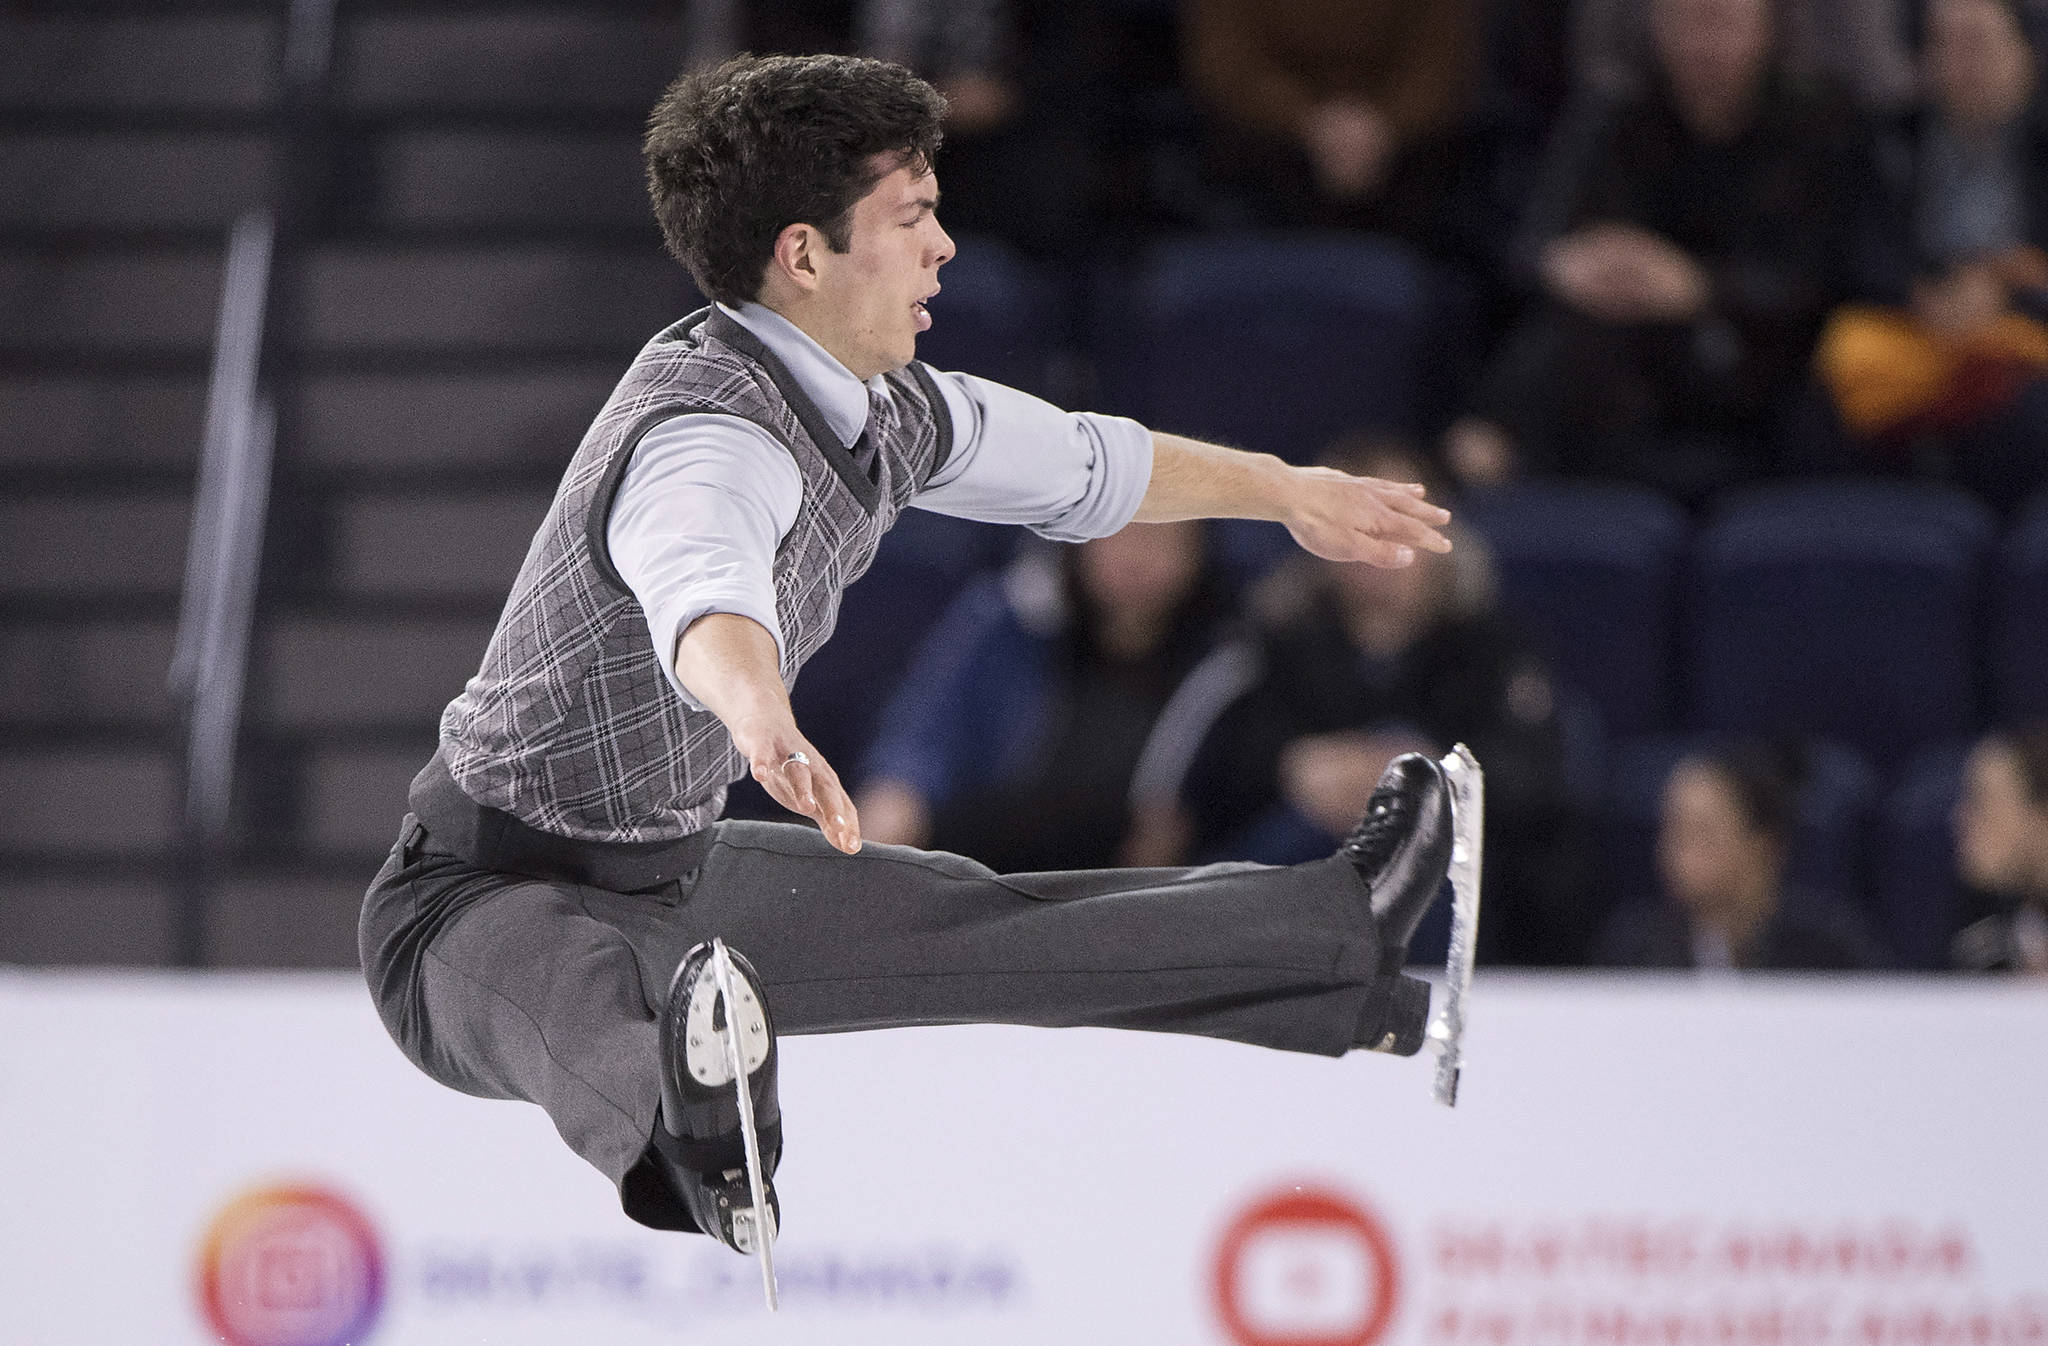 Canada’s Keegan Messing performs his short program in the men’s competition at Skate Canada International in Laval, Quebec, Friday, Oct. 26, 2018. (Paul Chiasson | The Canadian Press)